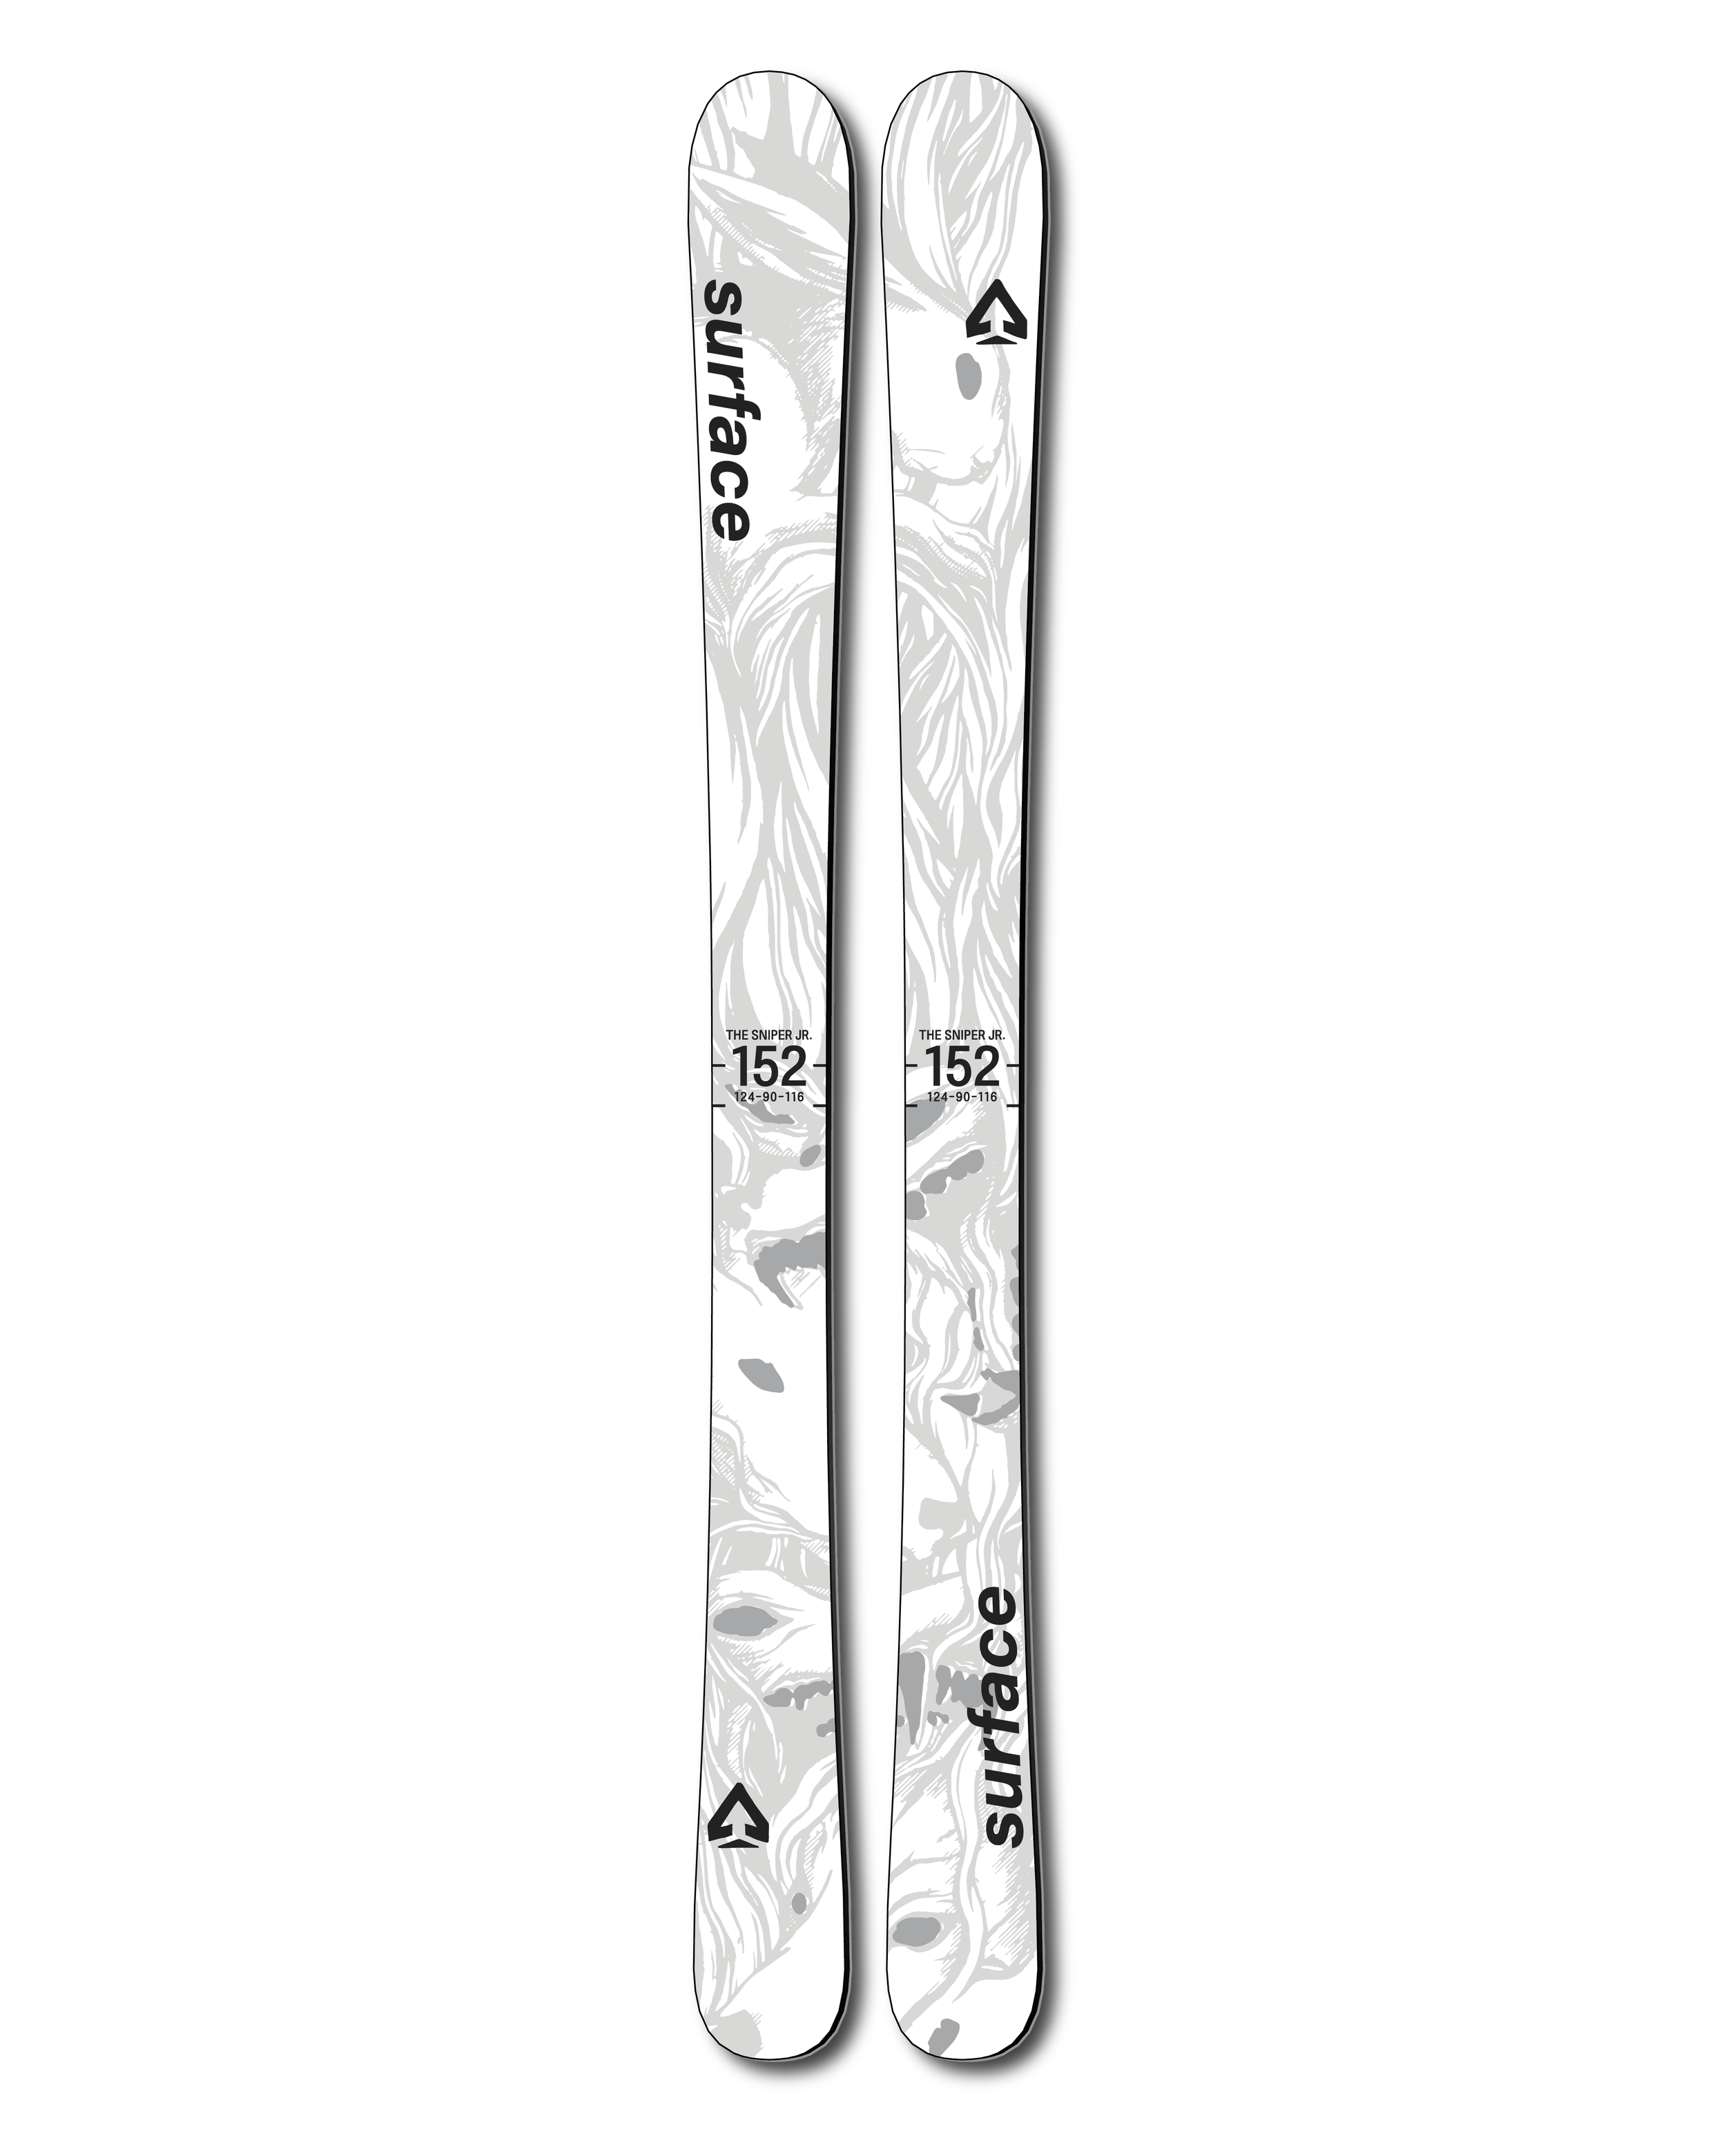 Sniper 2022 — SURFACE SKIS